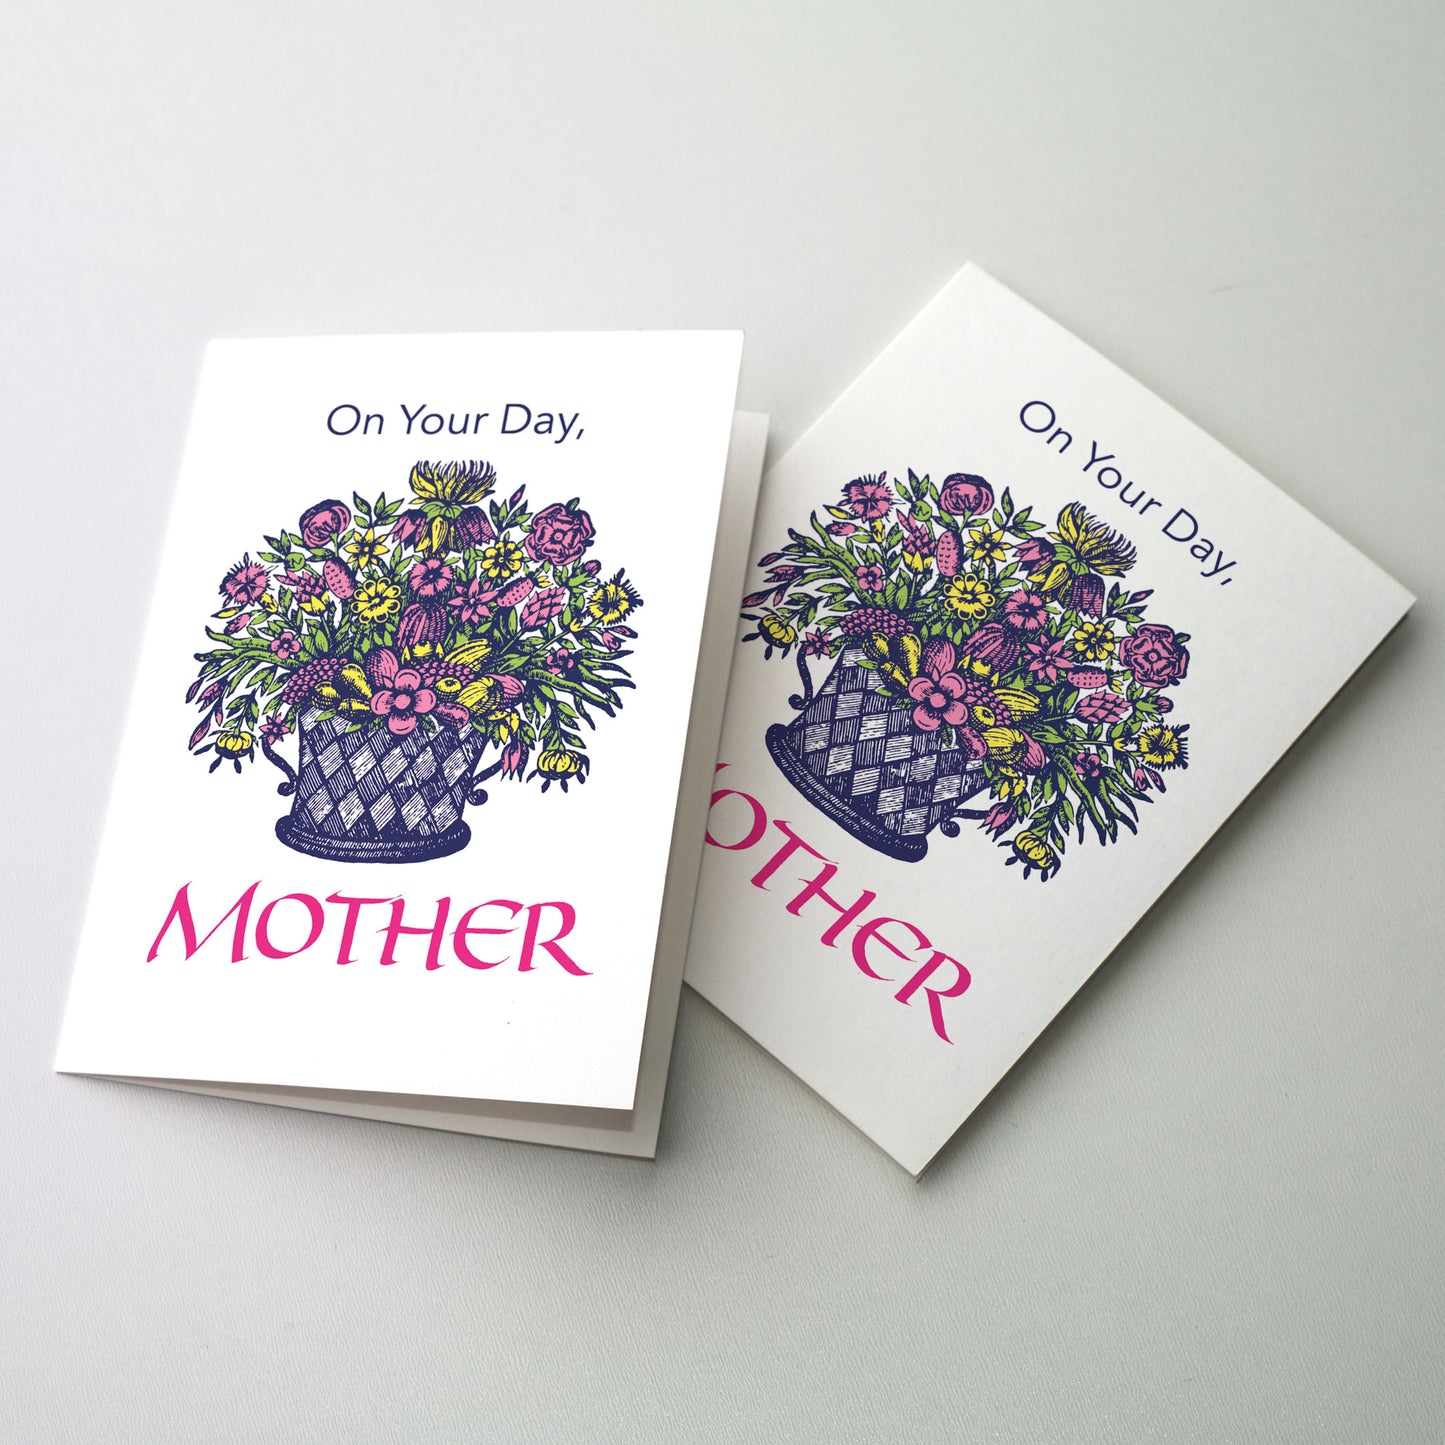 On Your Day, Mother - Mother's Day Card